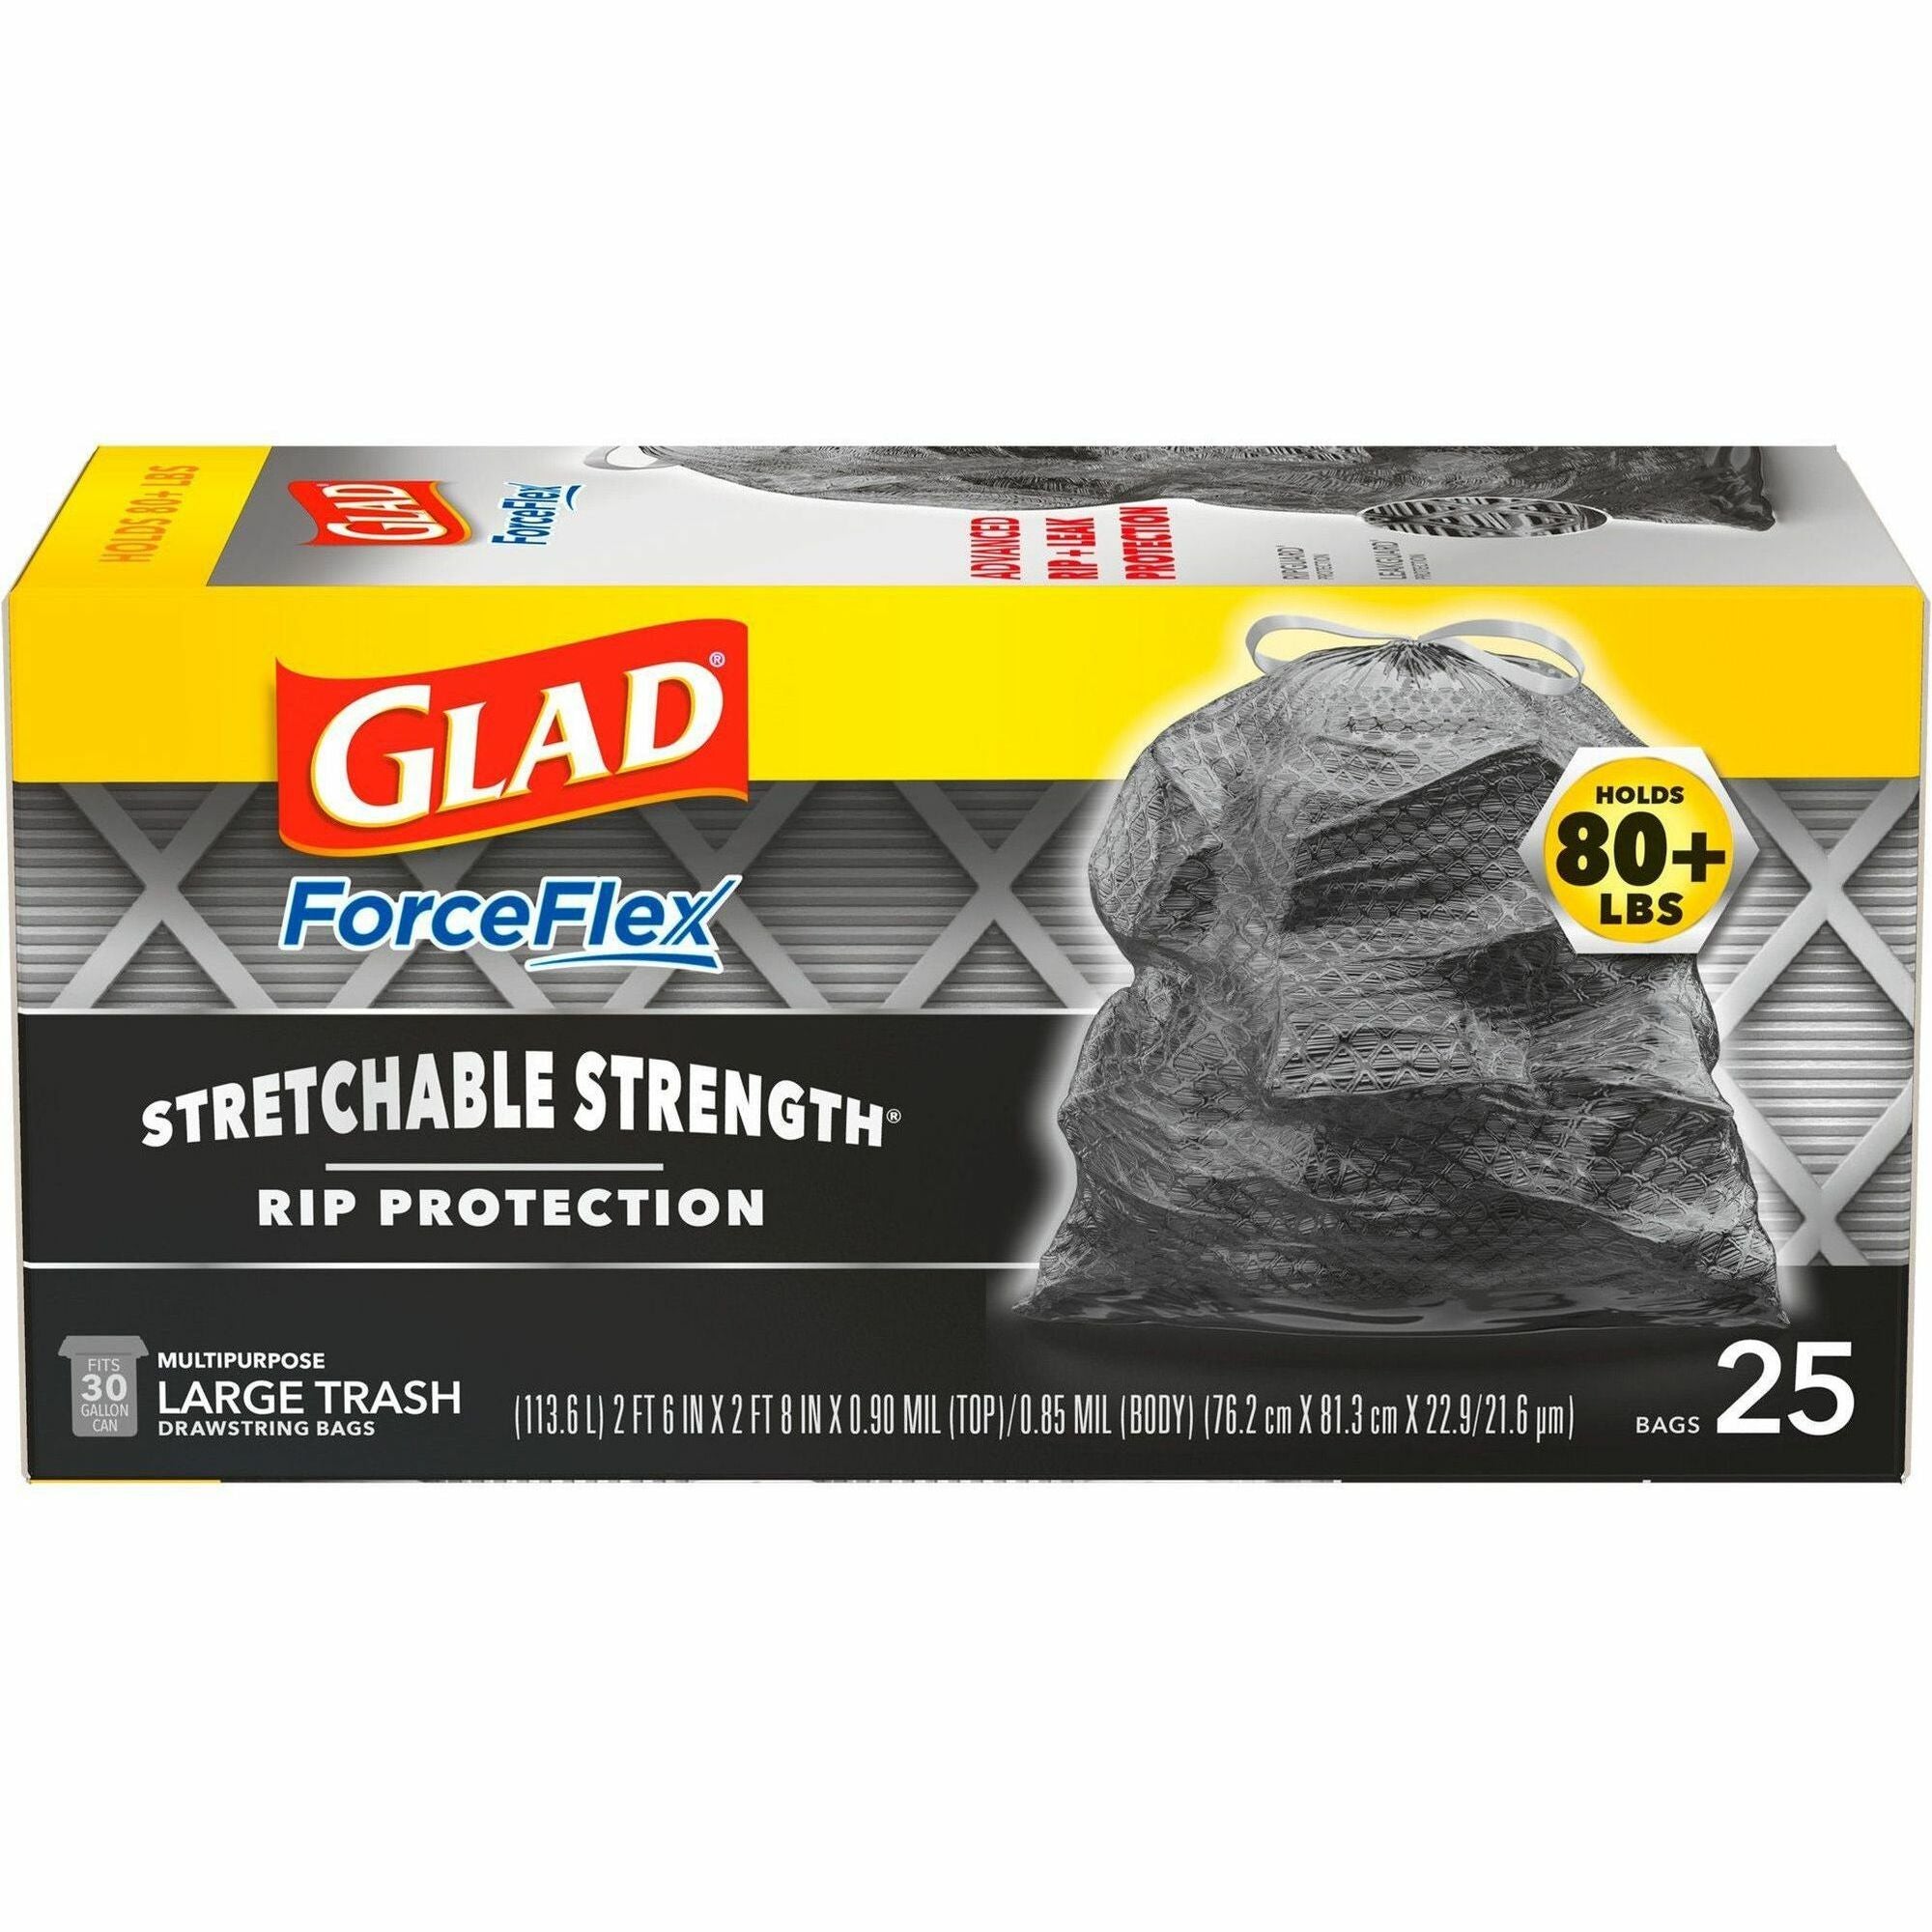 Glad ForceFlexPlus Large Drawstring Trash Bags - Large Size - 30 gal Capacity - 24.02" Width x 24.88" Length - Drawstring Closure - Black - 1Each - 25 Per Box - Home, Office, Can - 1